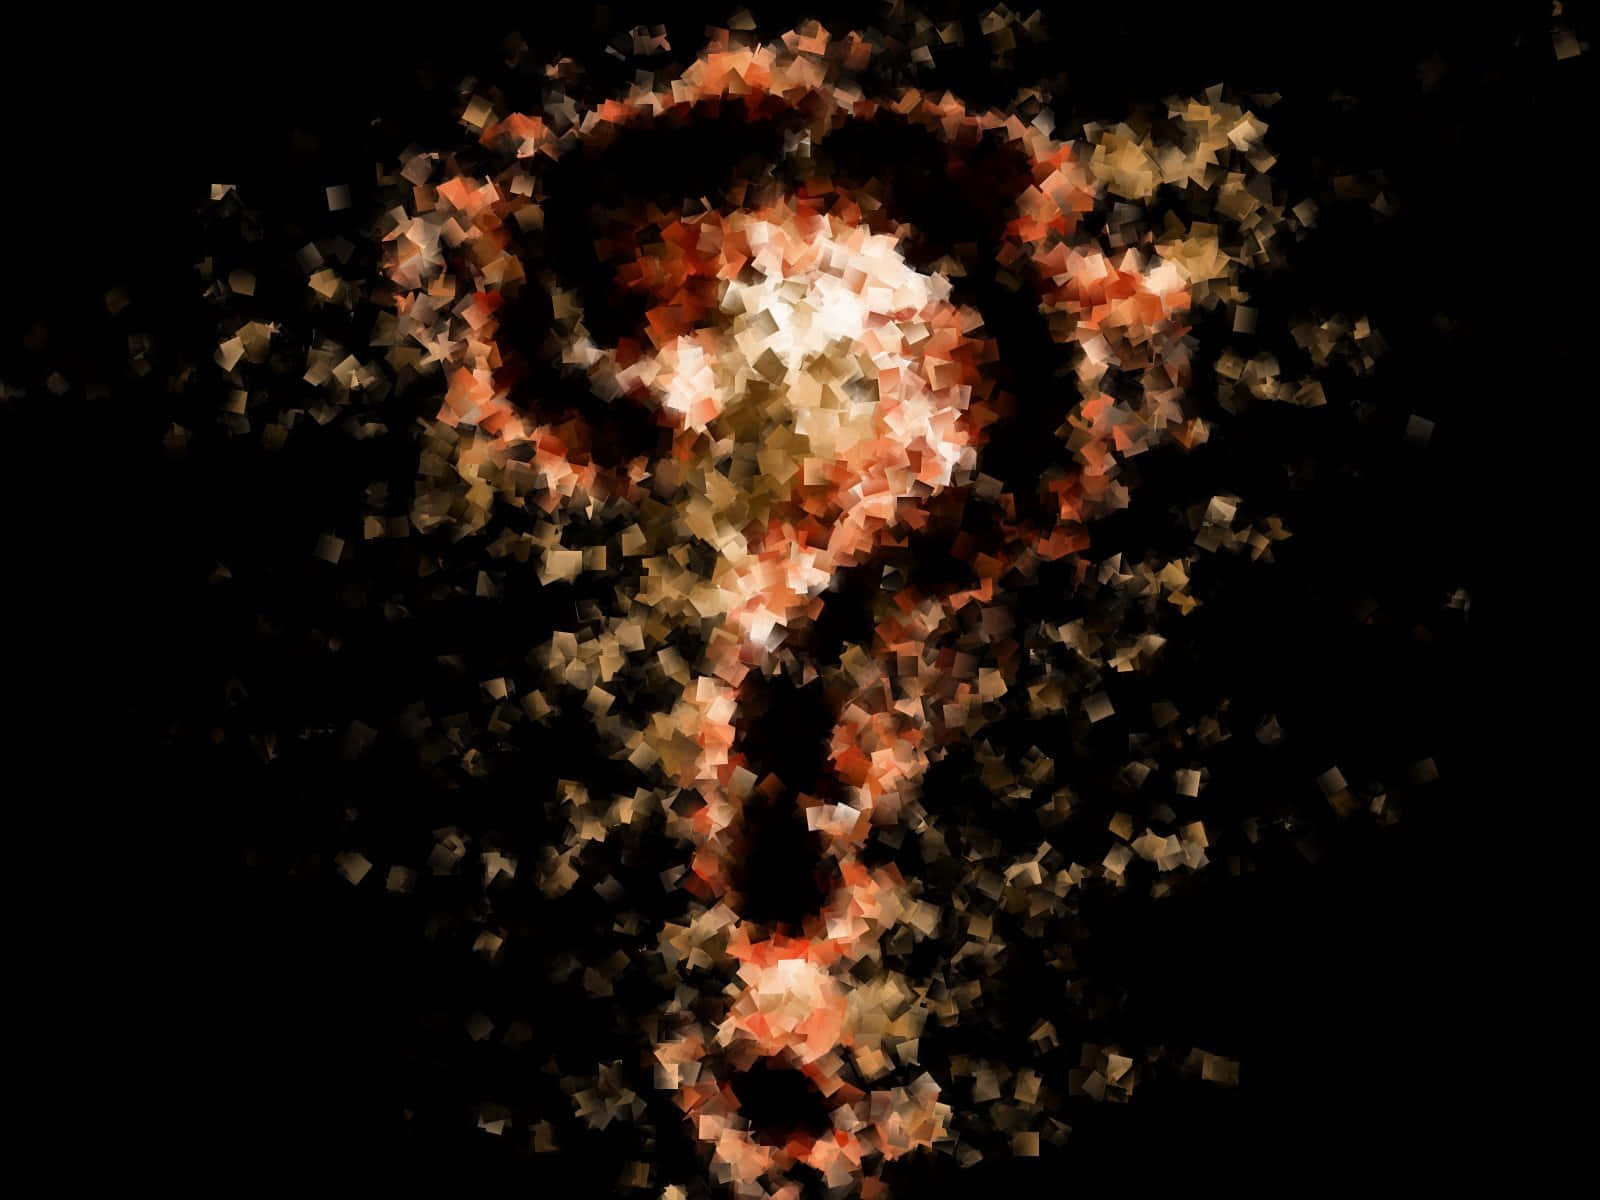 A Question Mark Made Of Fire And Ash